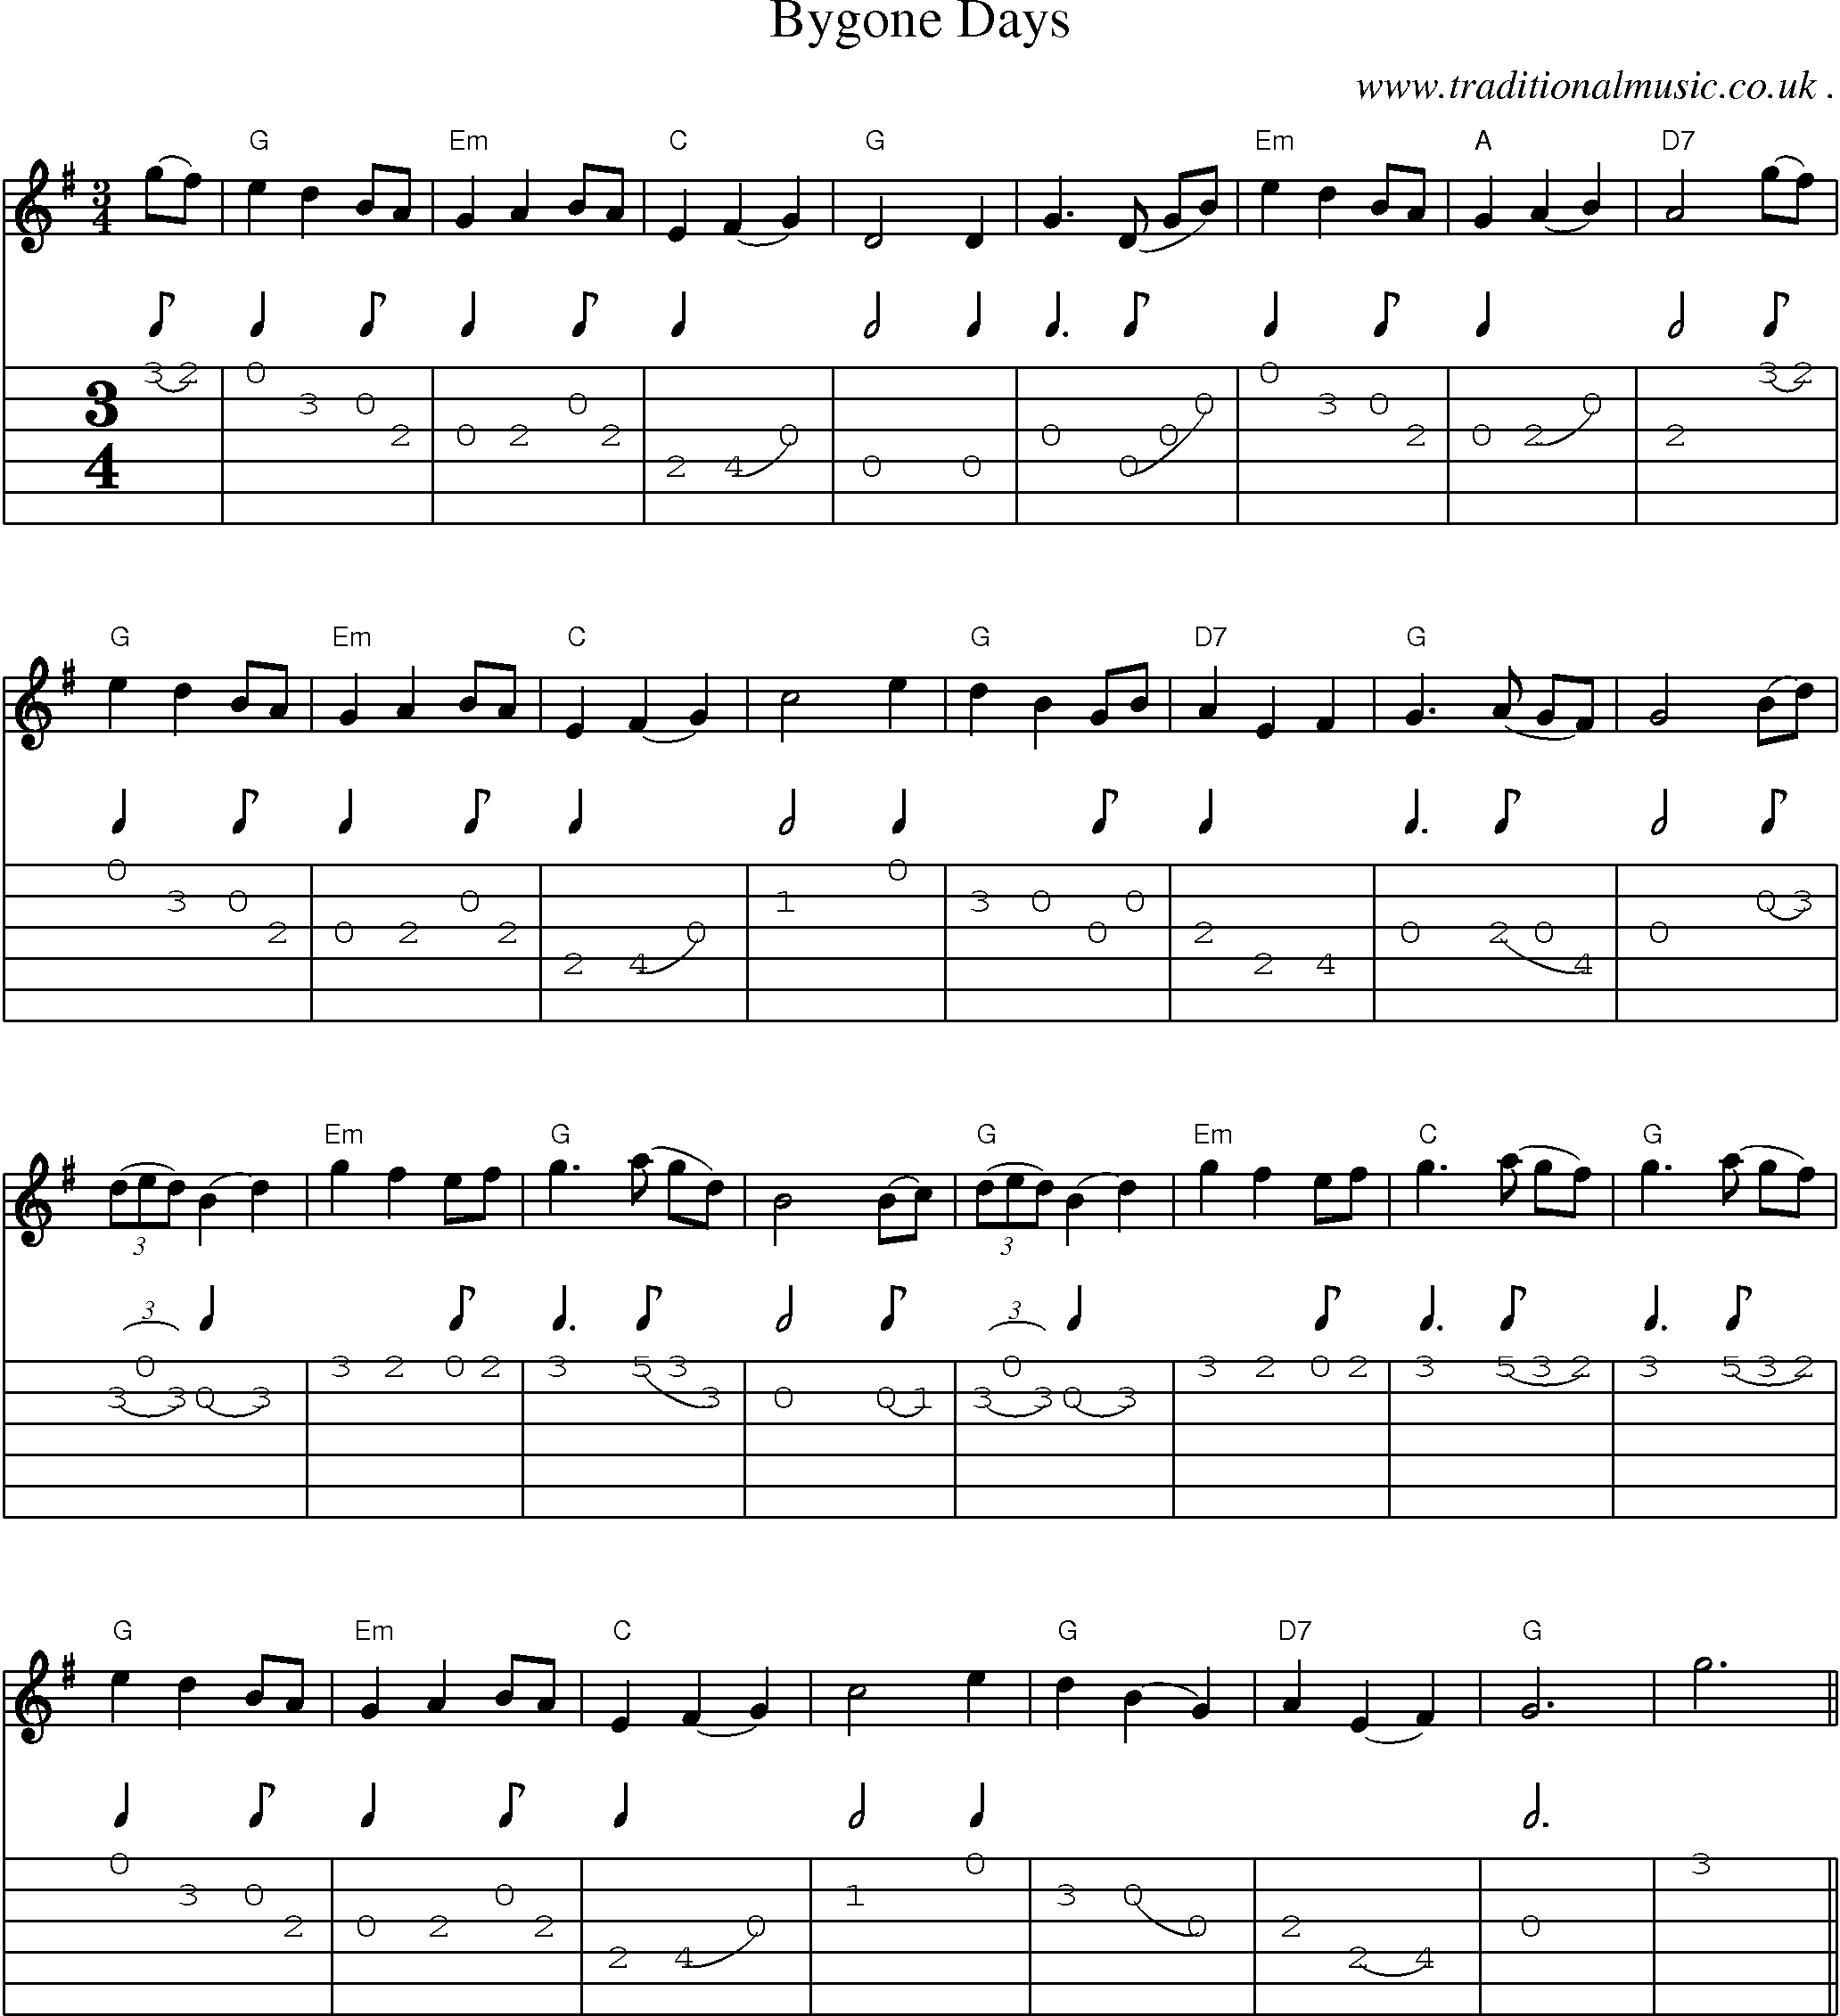 Music Score and Guitar Tabs for Bygone Days